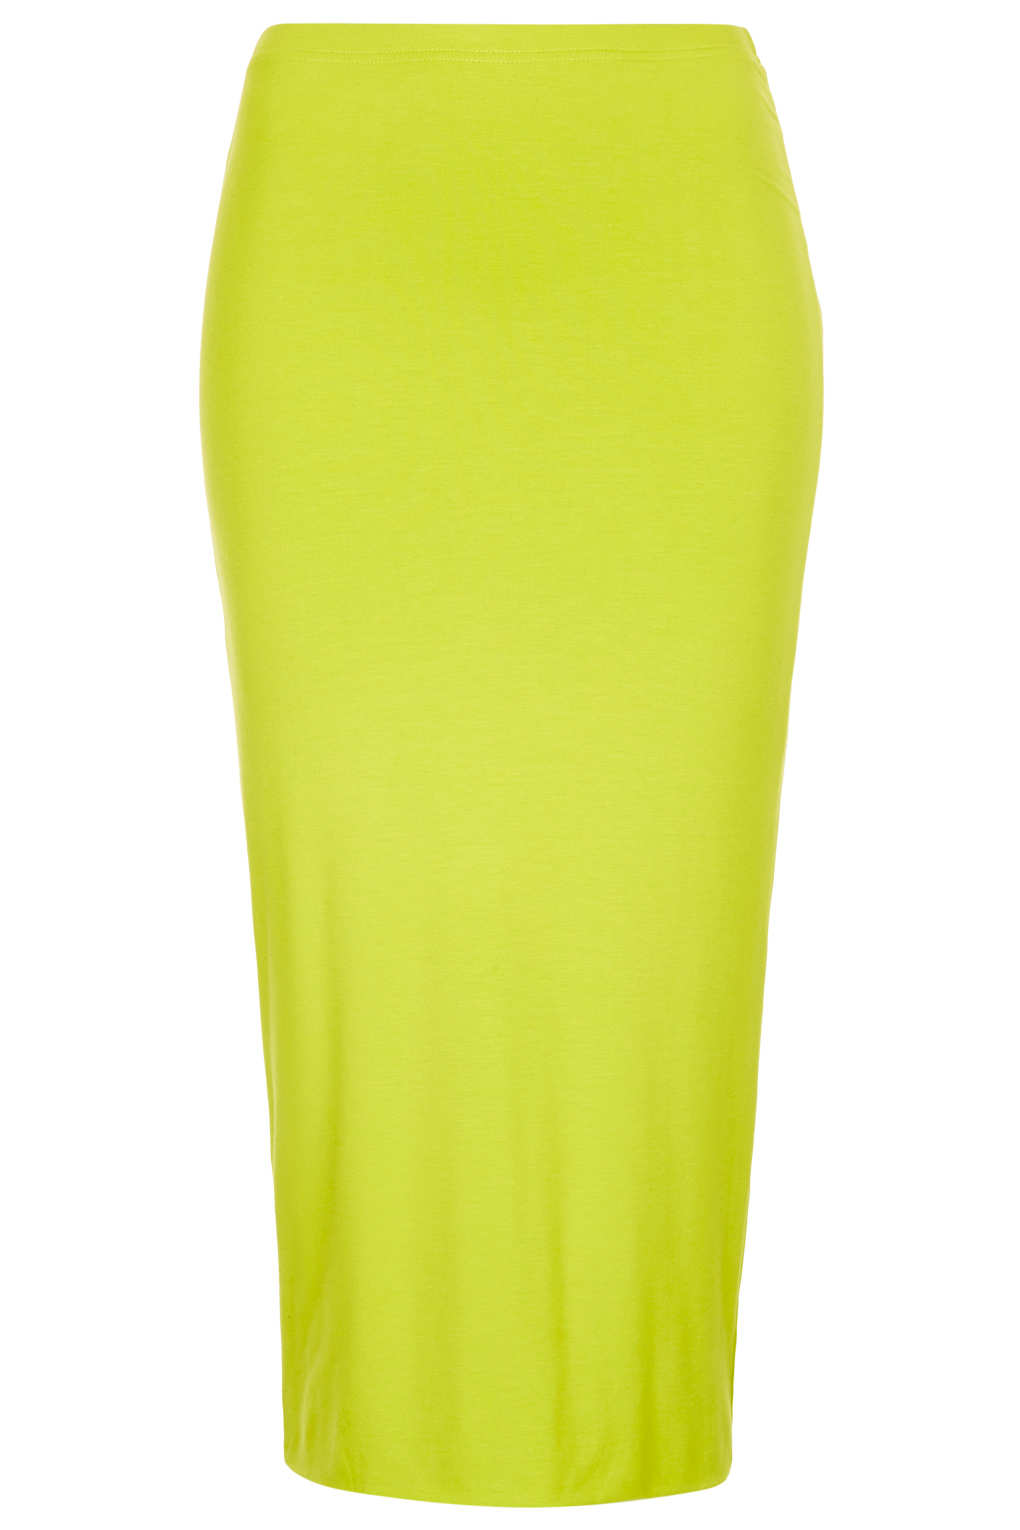 TOPSHOP Lime Double Layer Tube Skirt in Green - Lyst